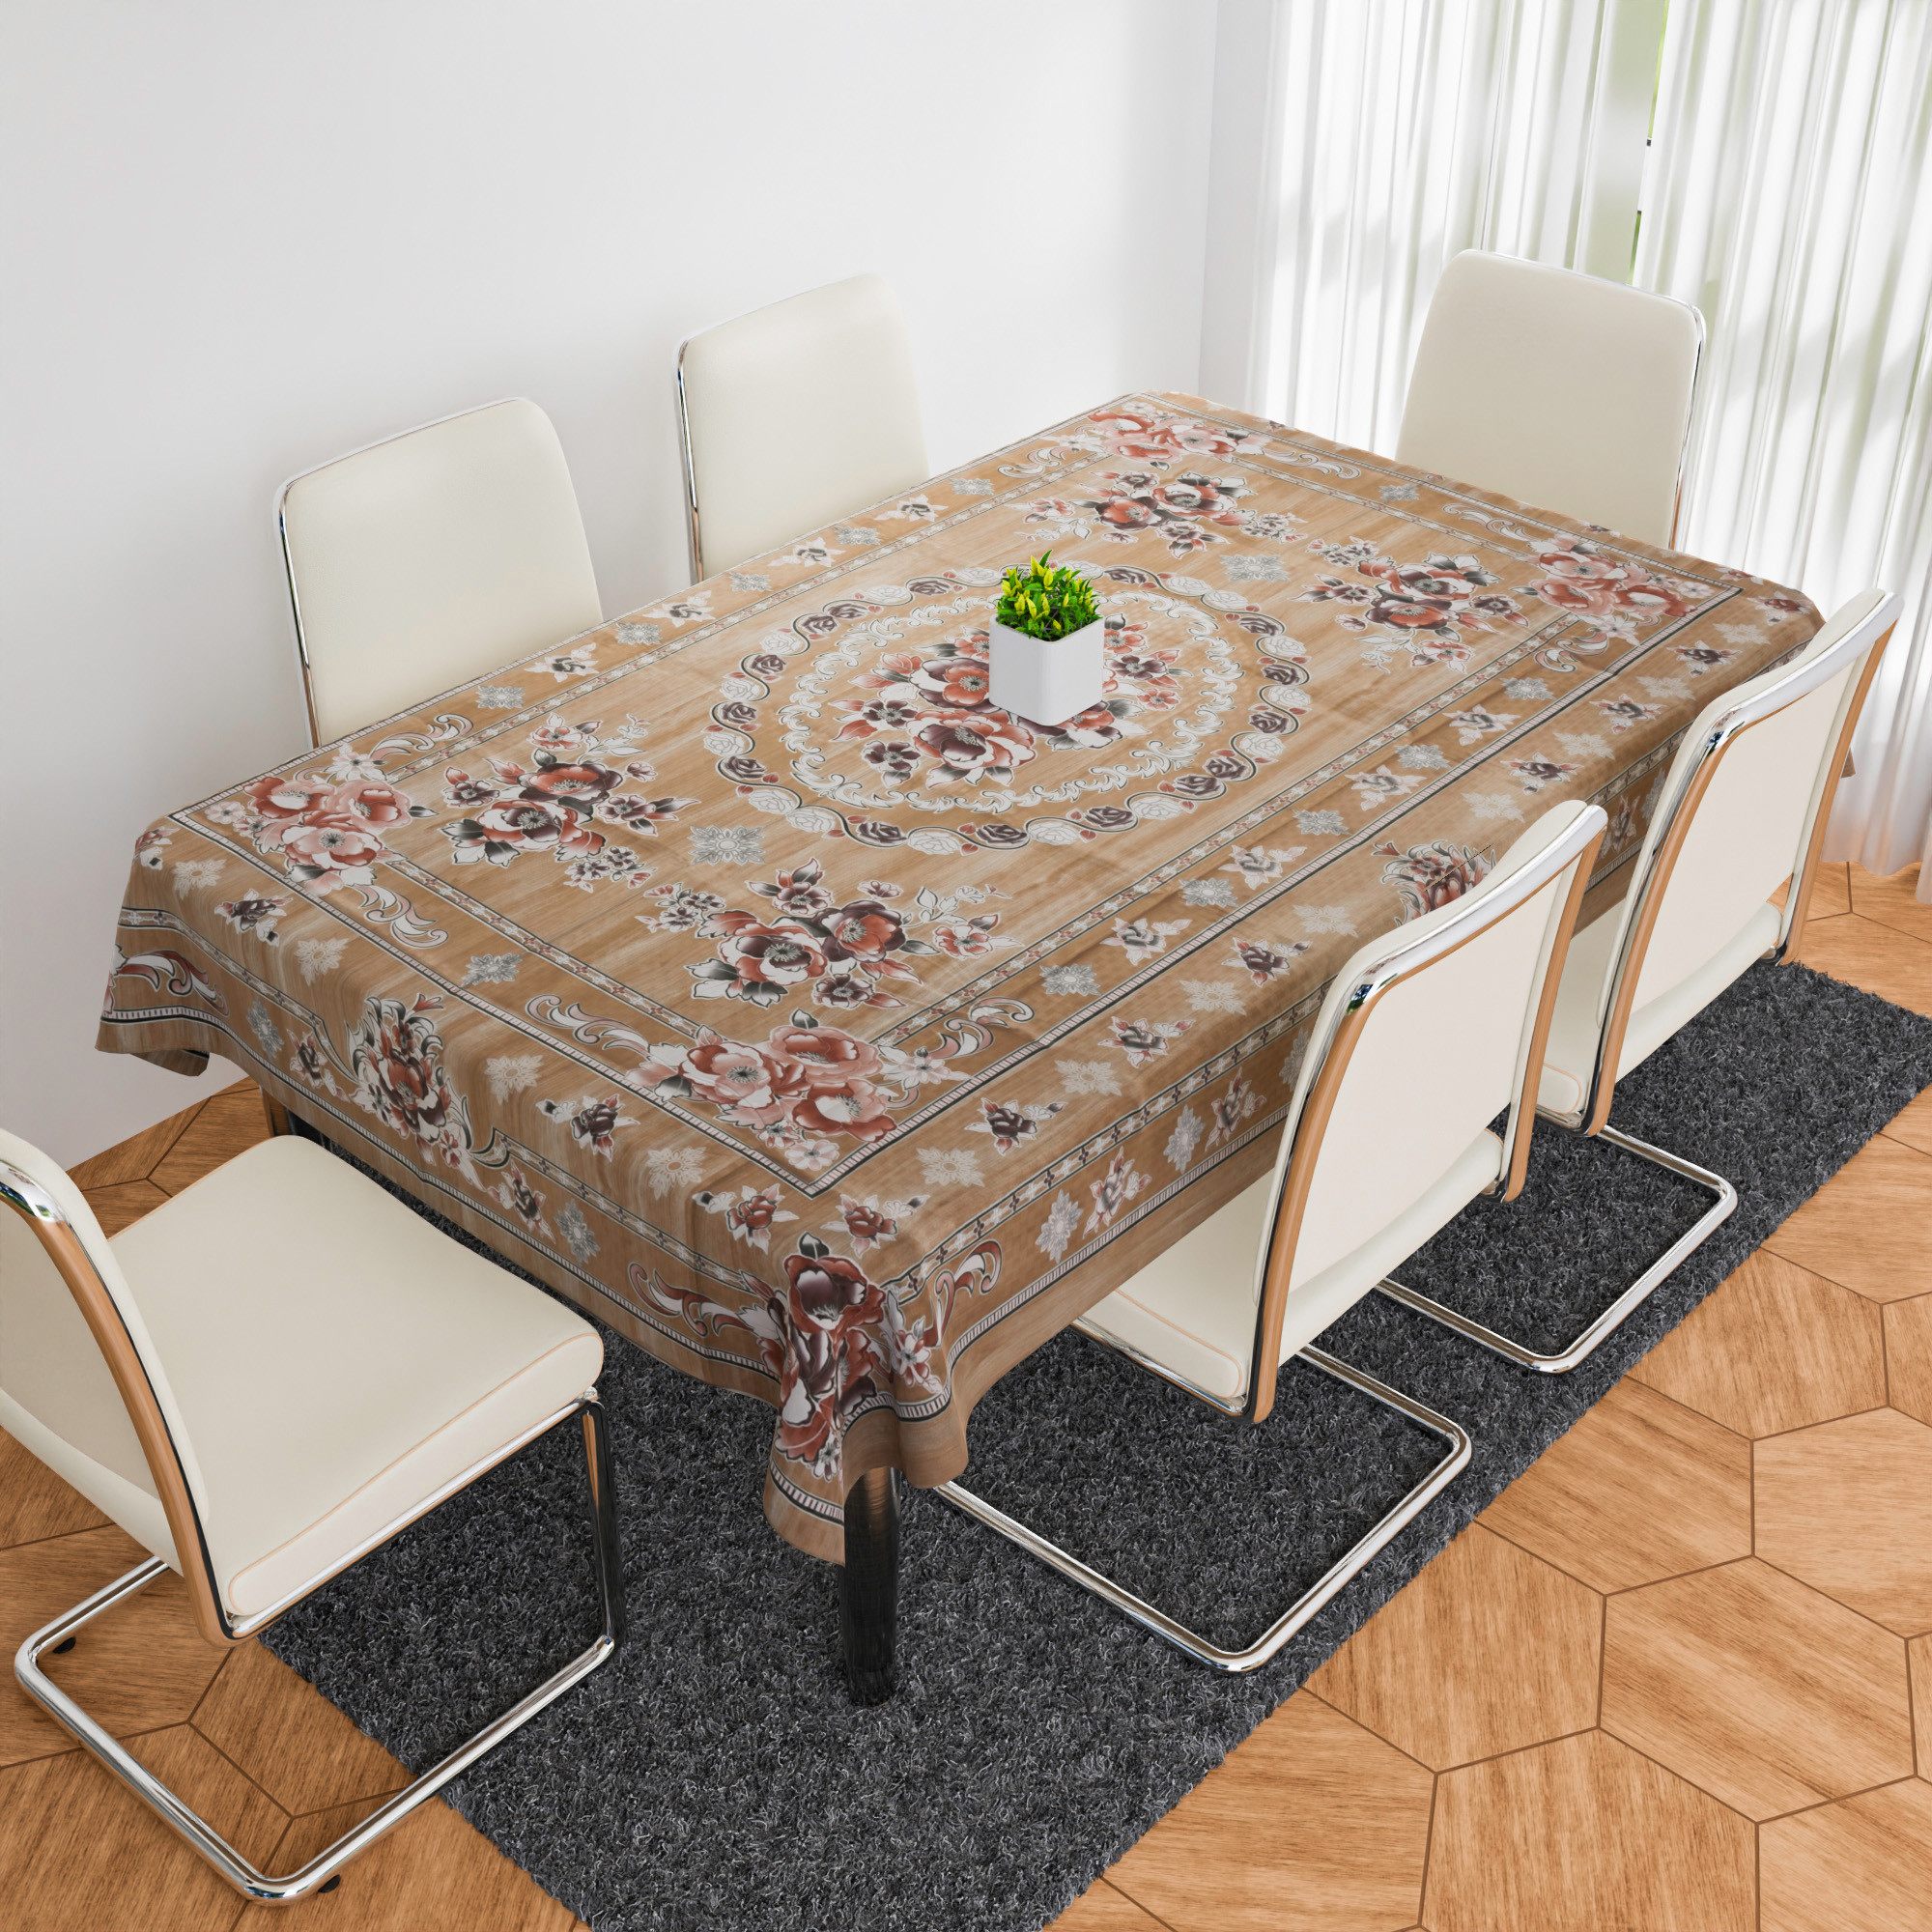 Kuber Industries Dining Table Cover | PVC Table Cloth Cover | 6 Seater Table Cloth | Table Protector | Table Cover for Dining Table | Passion Flower | 60x90 Inch | DTC | Brown